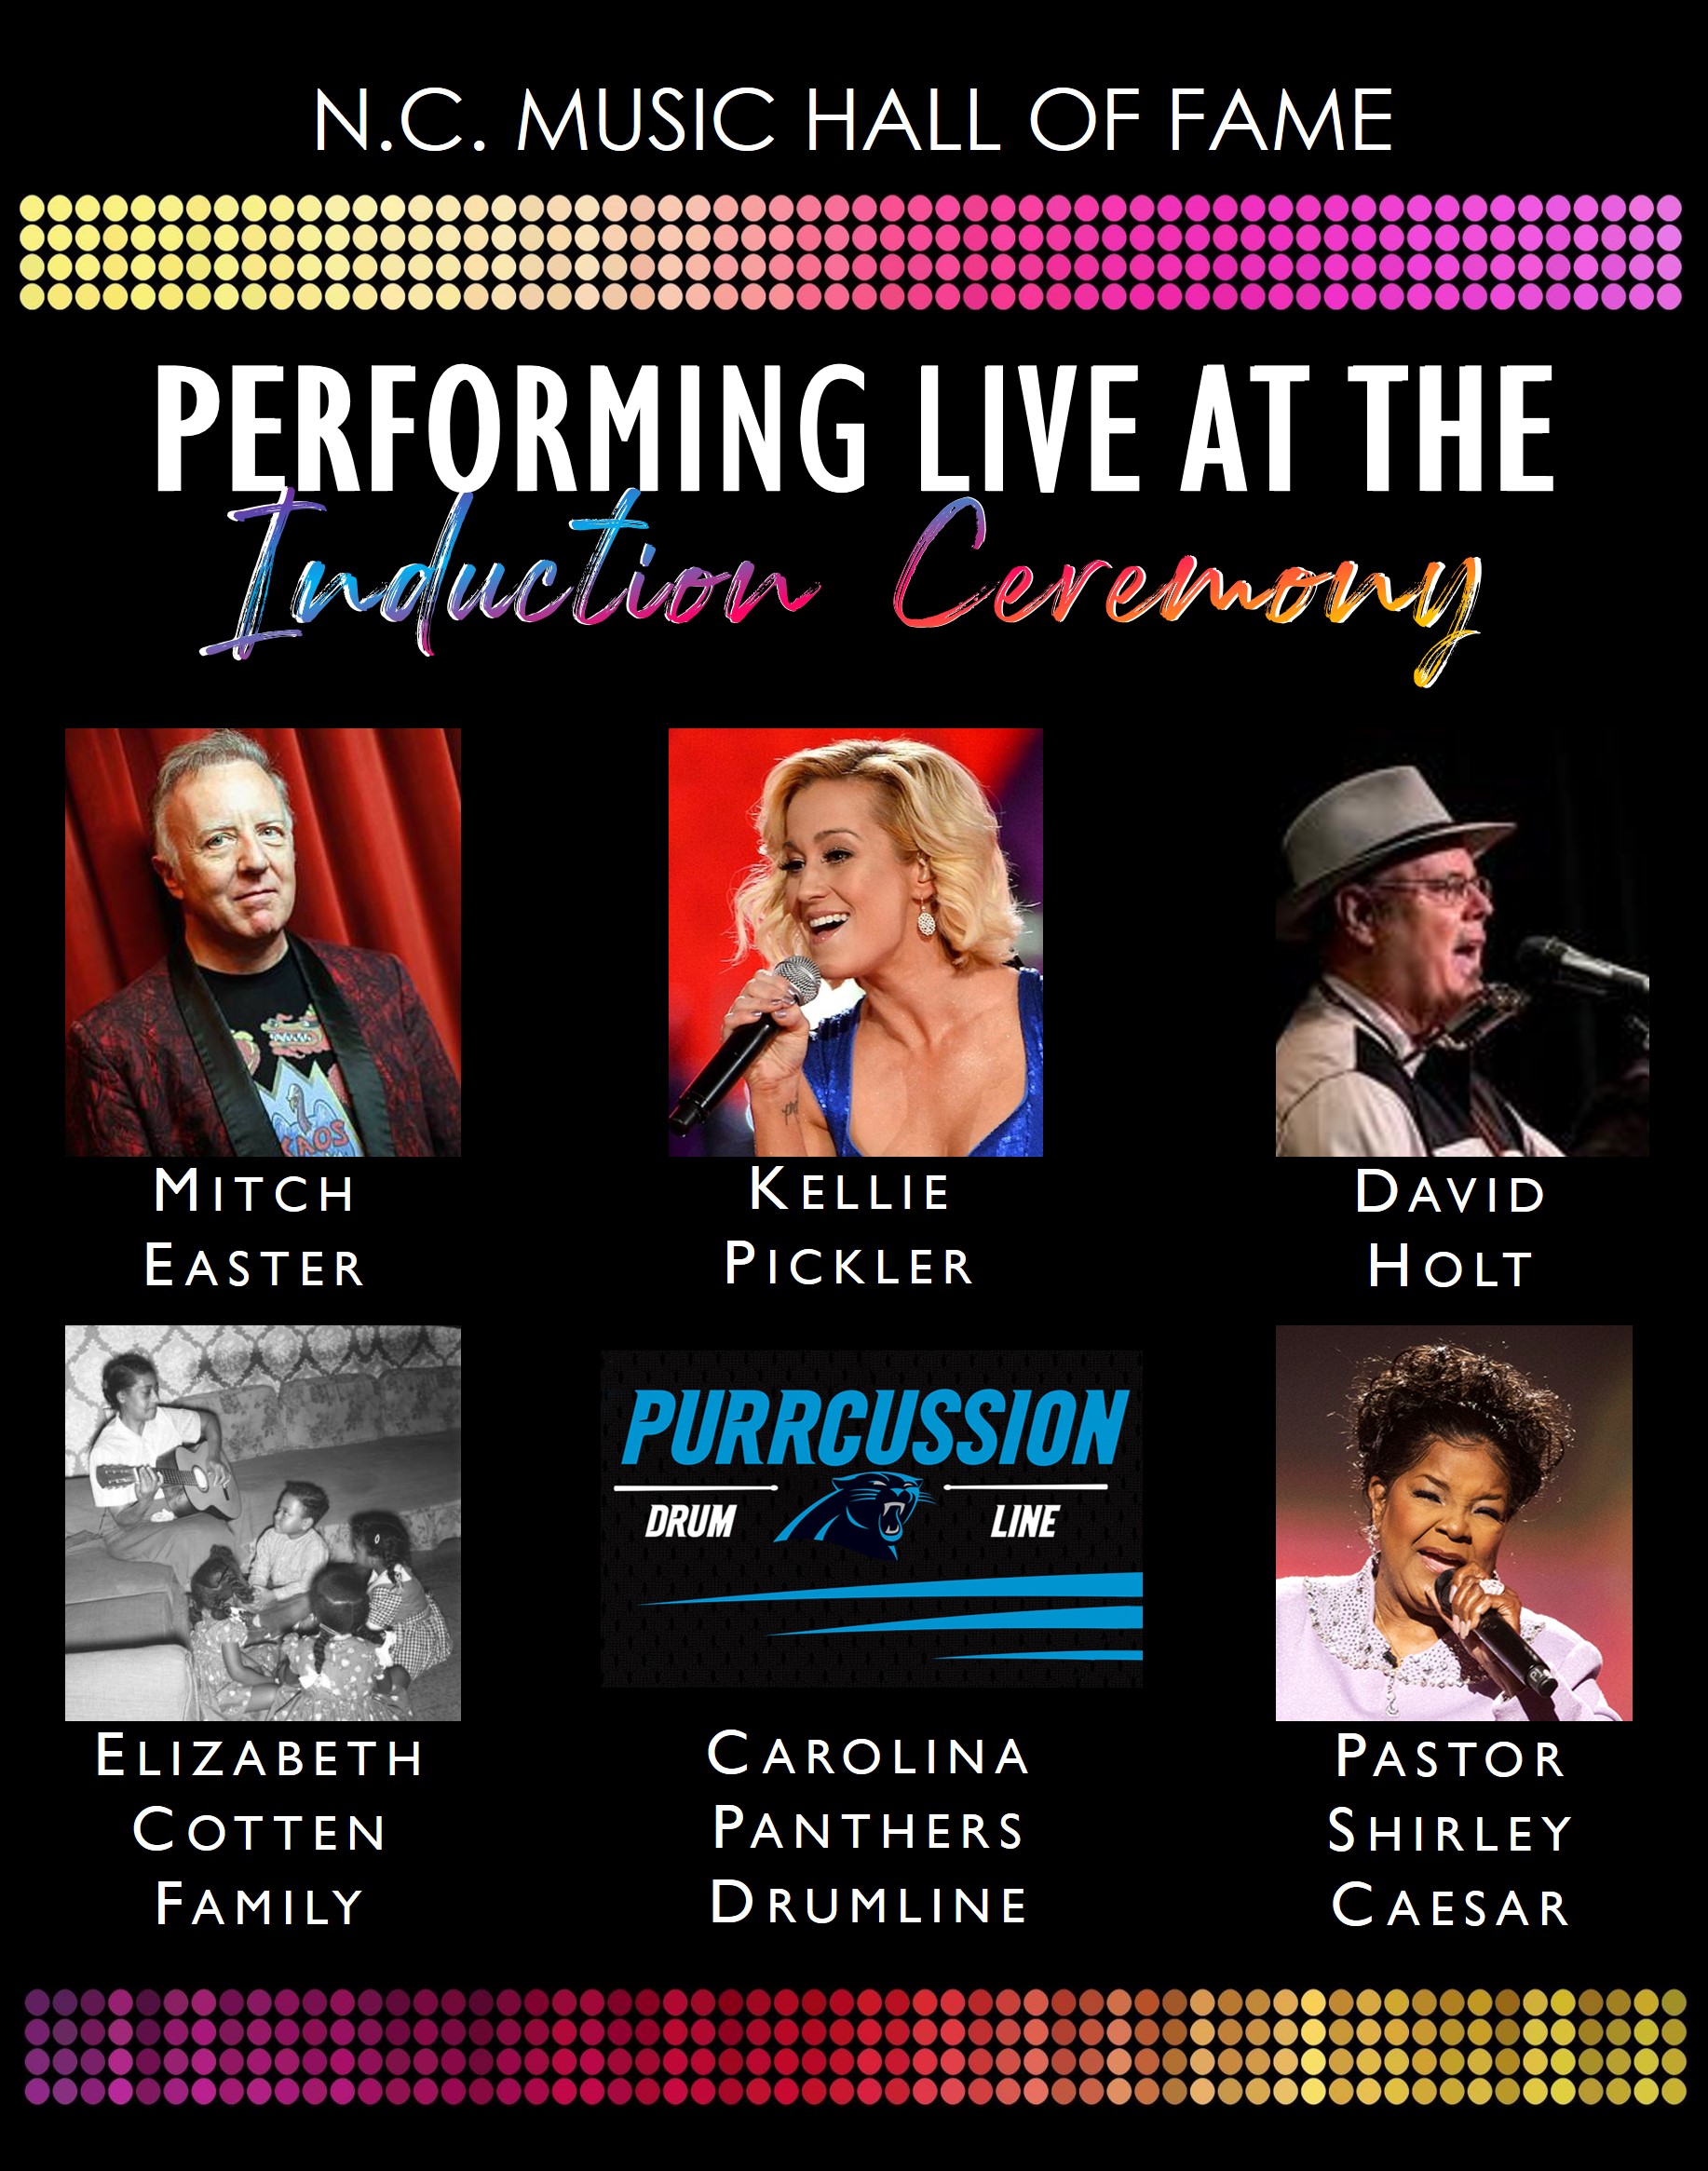 Performing live at the 2019 Induction: Mitch Easter, Kellie Pickler, David Holt, Elizabeth Cotten's family, Shirley Caesar, & PurrCussion